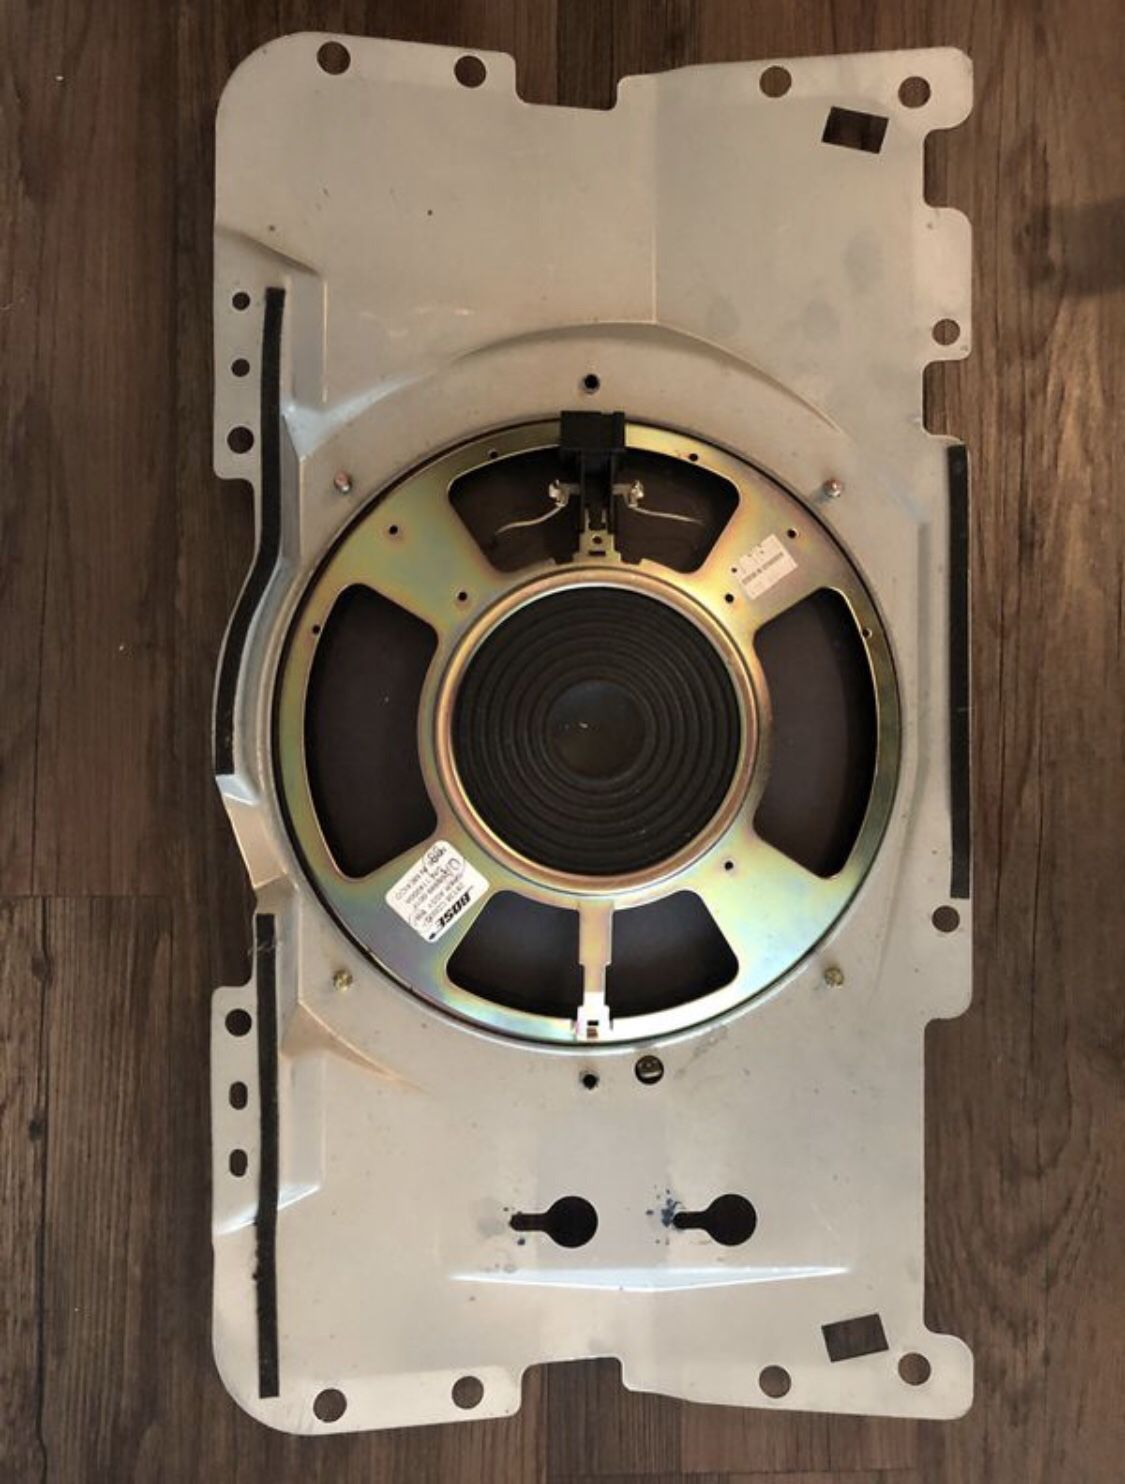 Bose Subwoofer Speaker with assembly plate